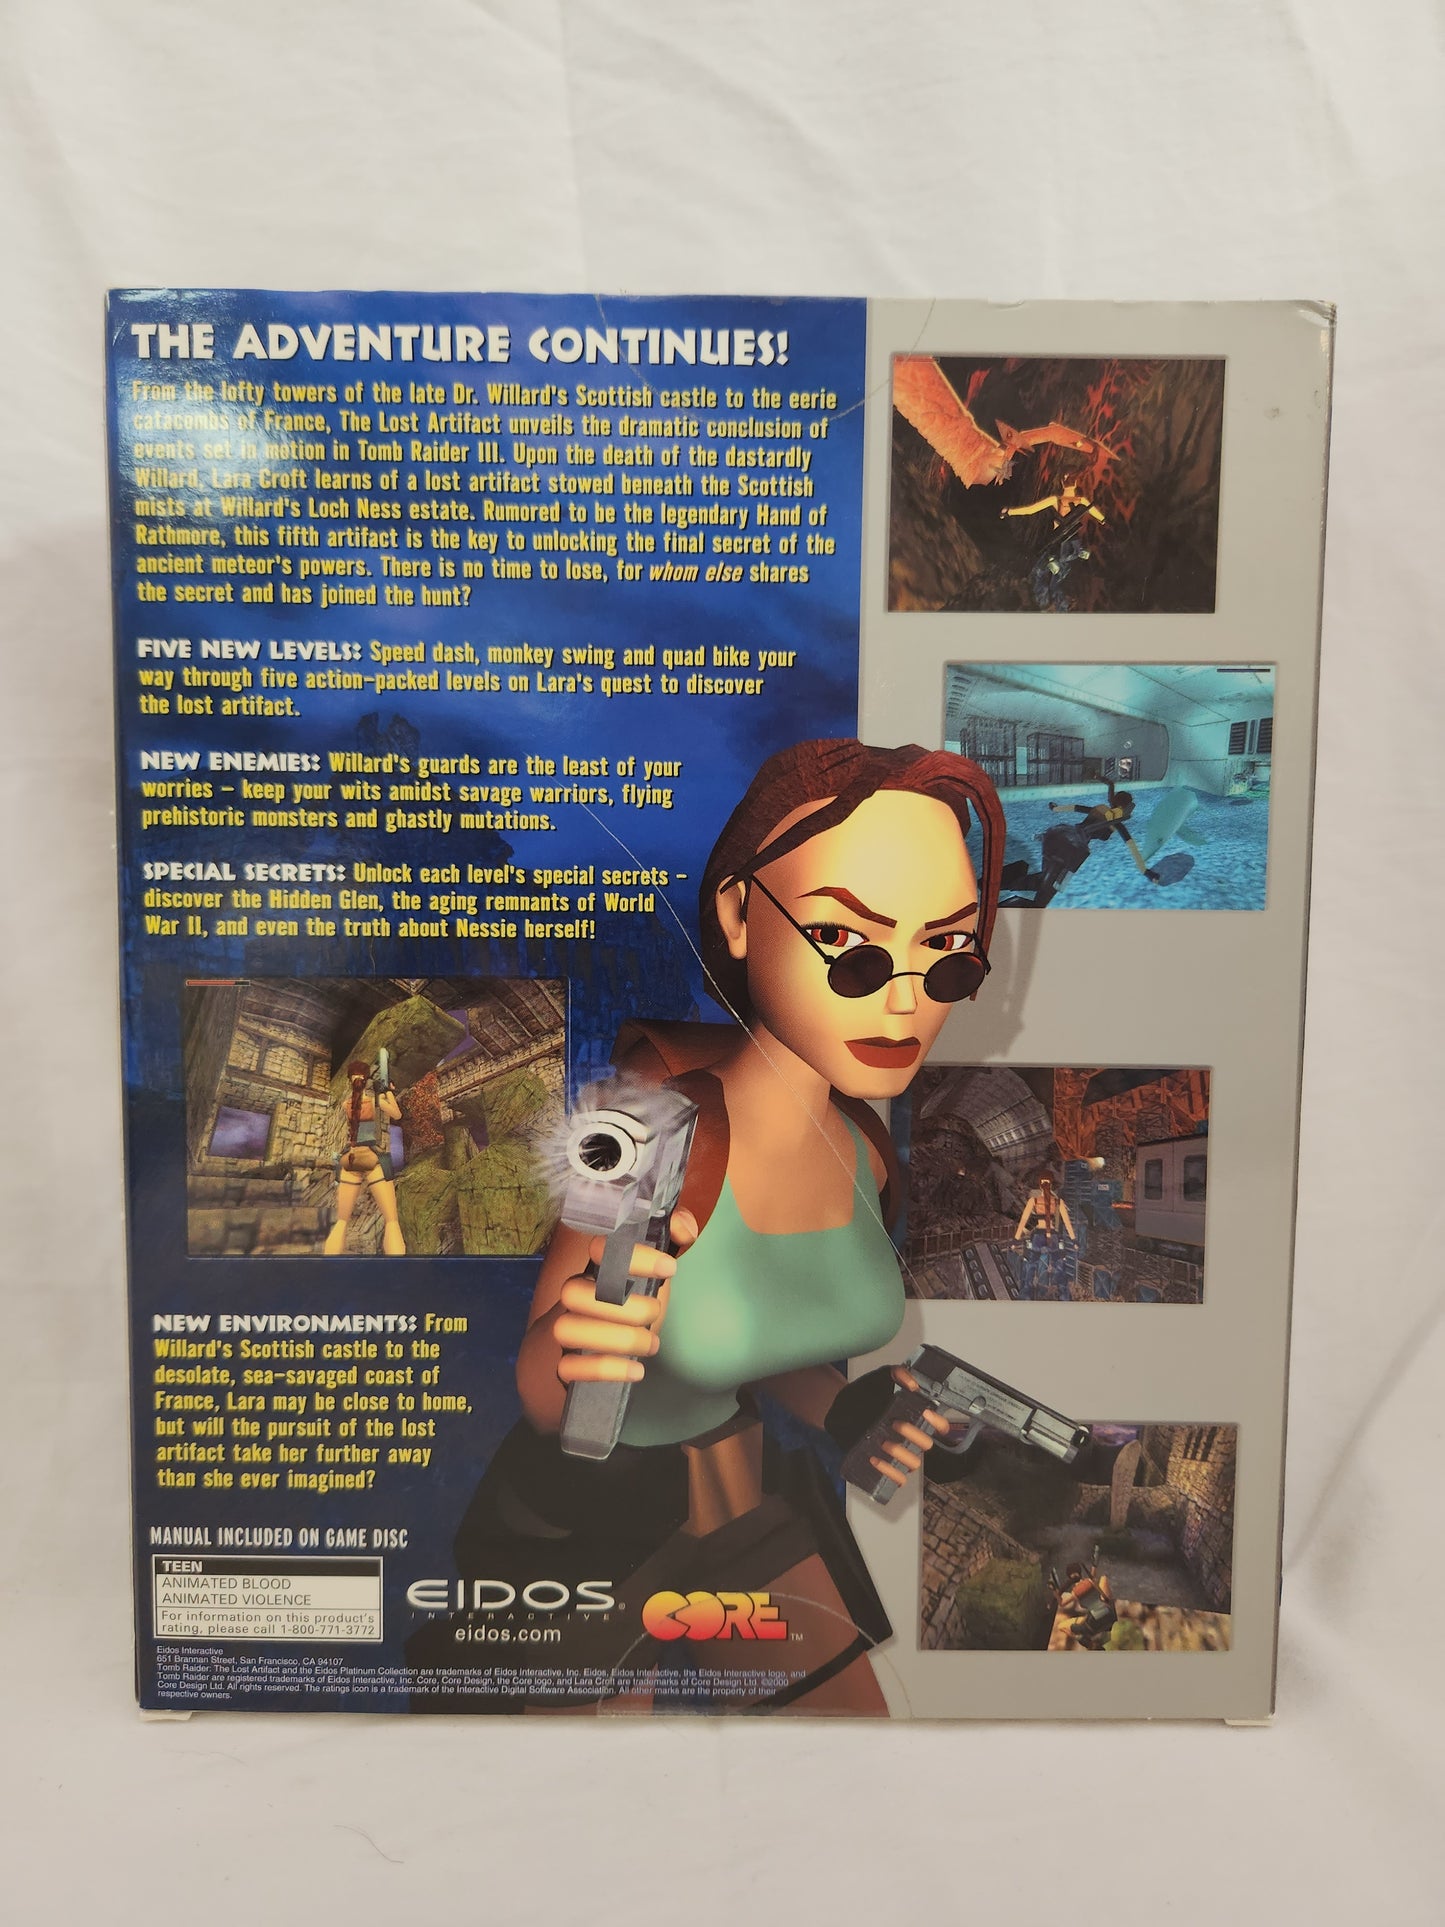 Tomb Raider: The Lost Artifact - Eidos Platinum Collection PC CD-ROM Game